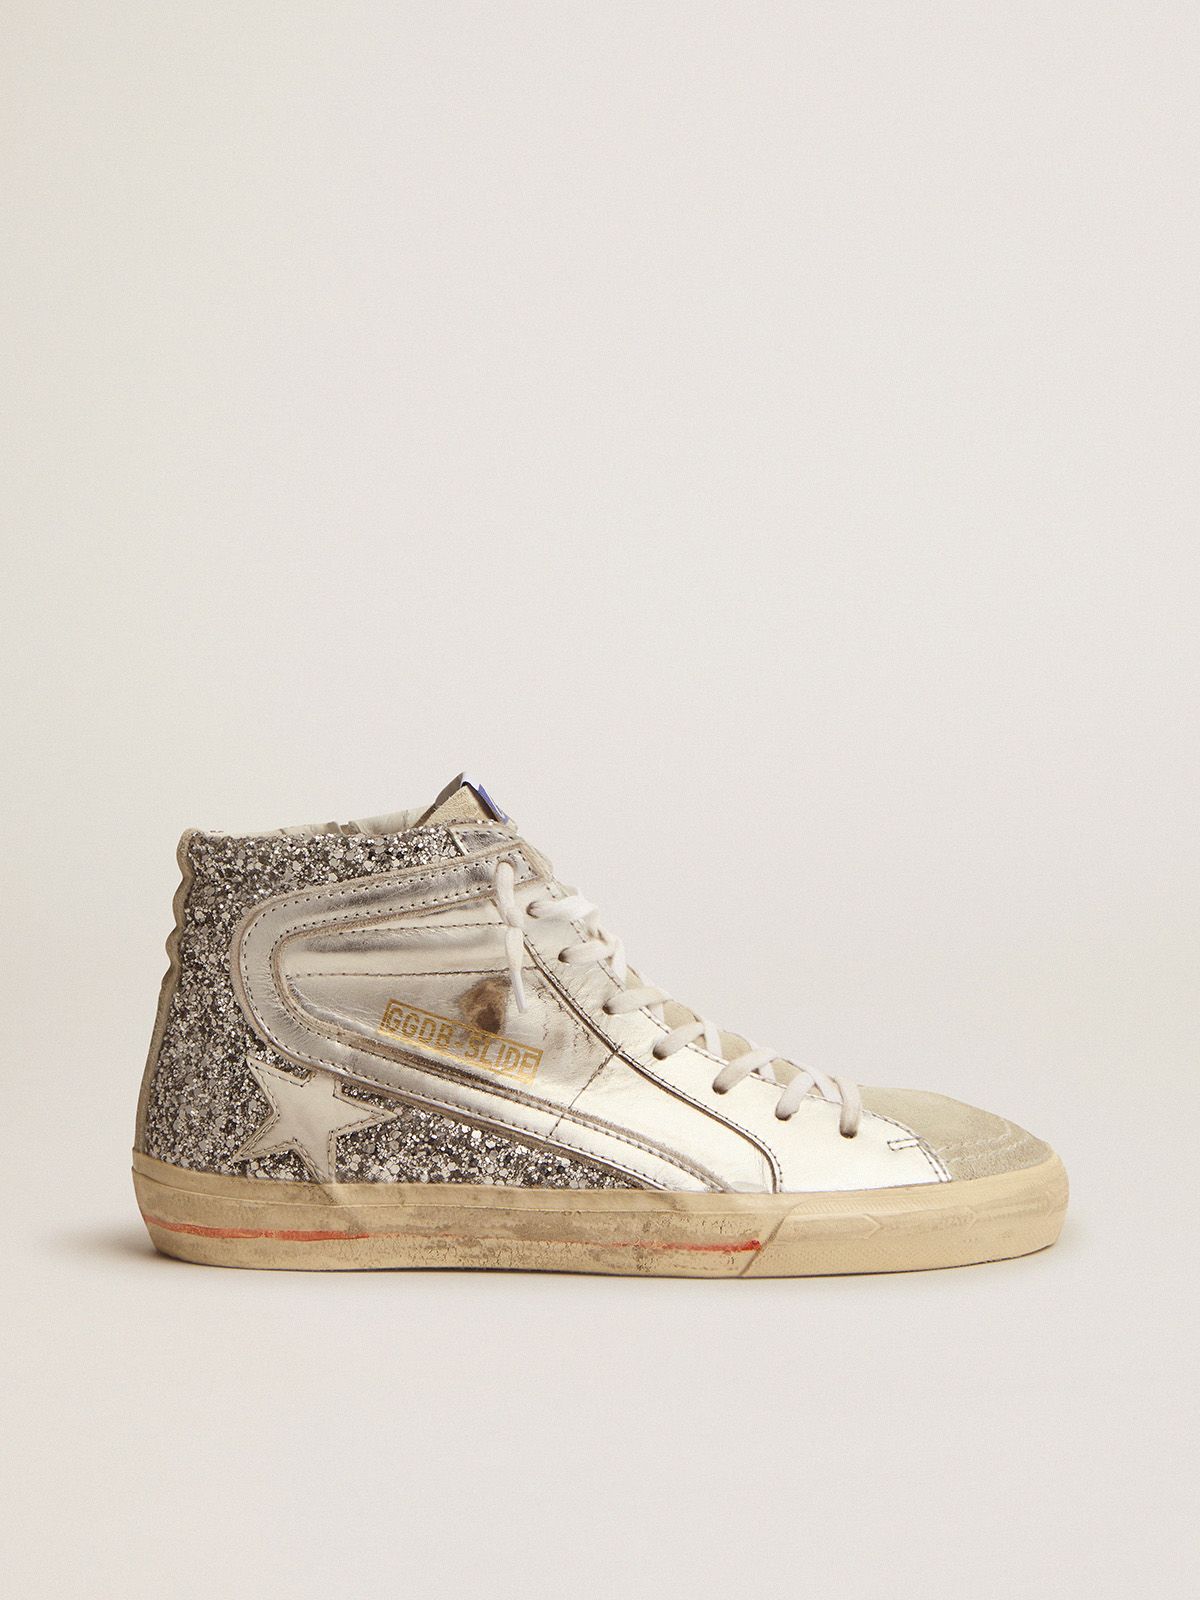 golden goose leather glitter with laminated sneakers and in upper Slide silver